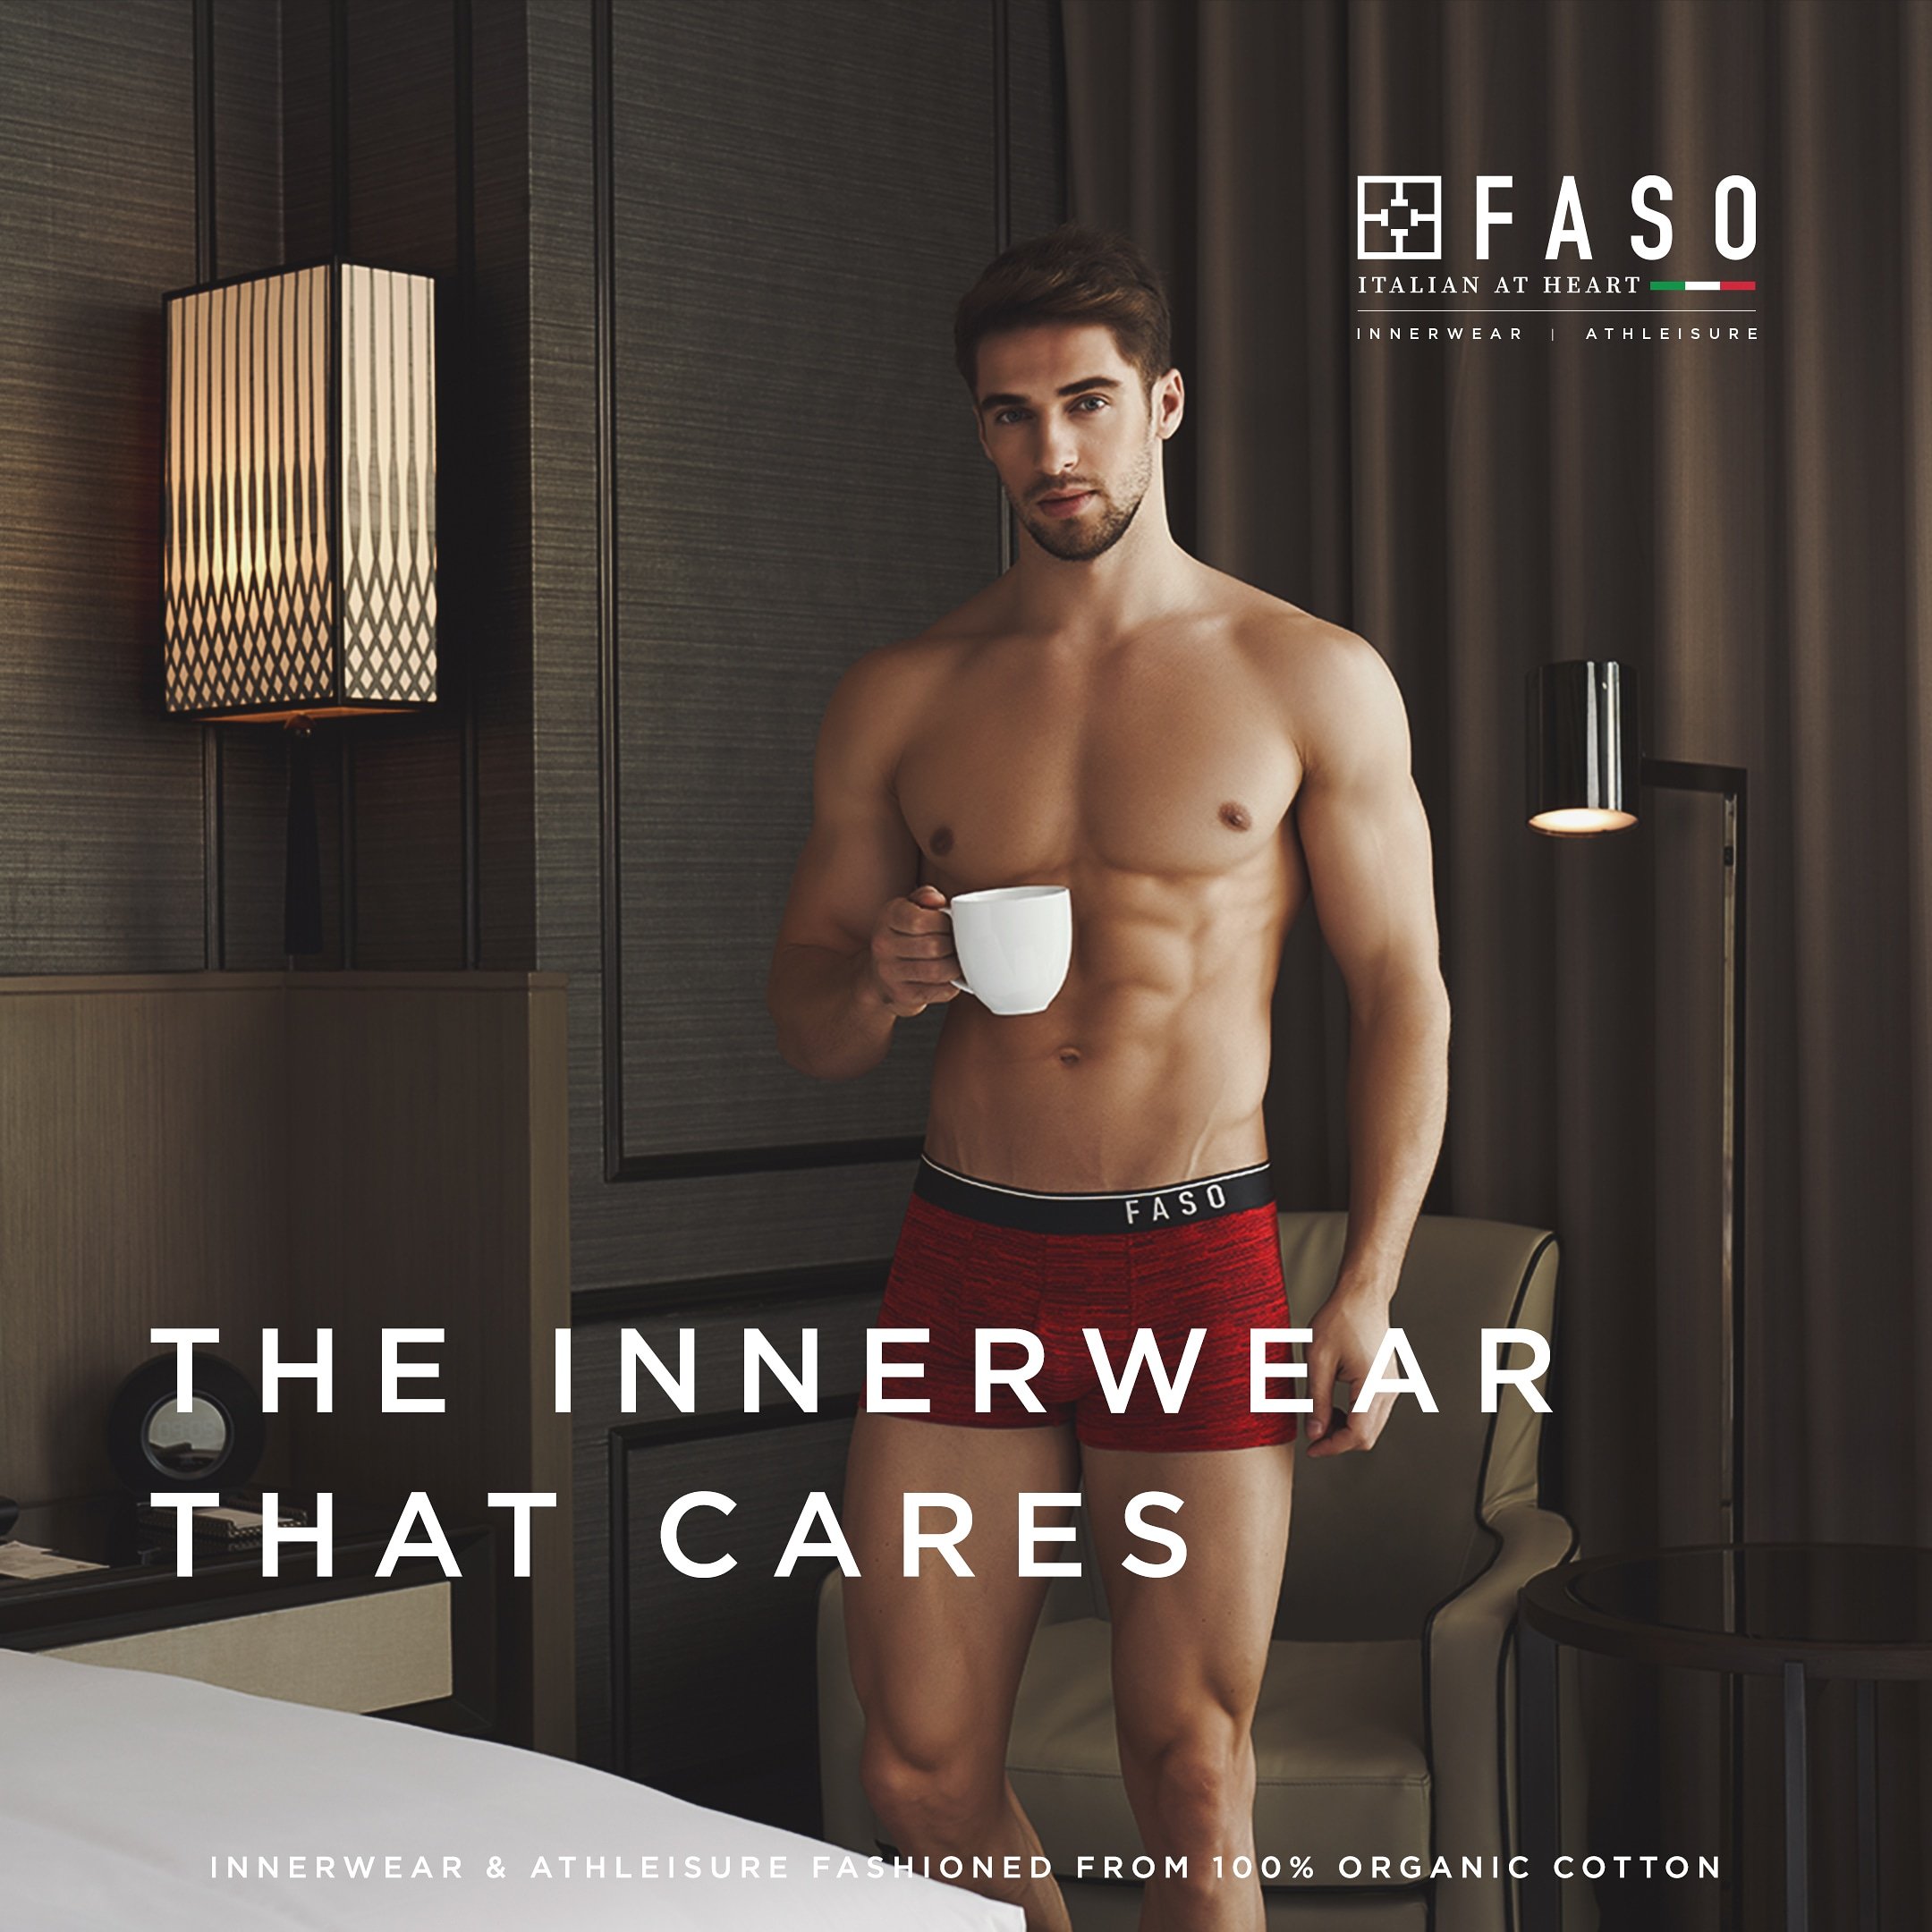 FASO on X: The Innerwear made with 100% Organic cotton which is so soft  and comfortable which really cares your body. #FasoClothings #FasoInnerwear  #organiccottoninnerwear #sustainablefashion #Organiccottonclothings  #Organicfabrics #ecofashion